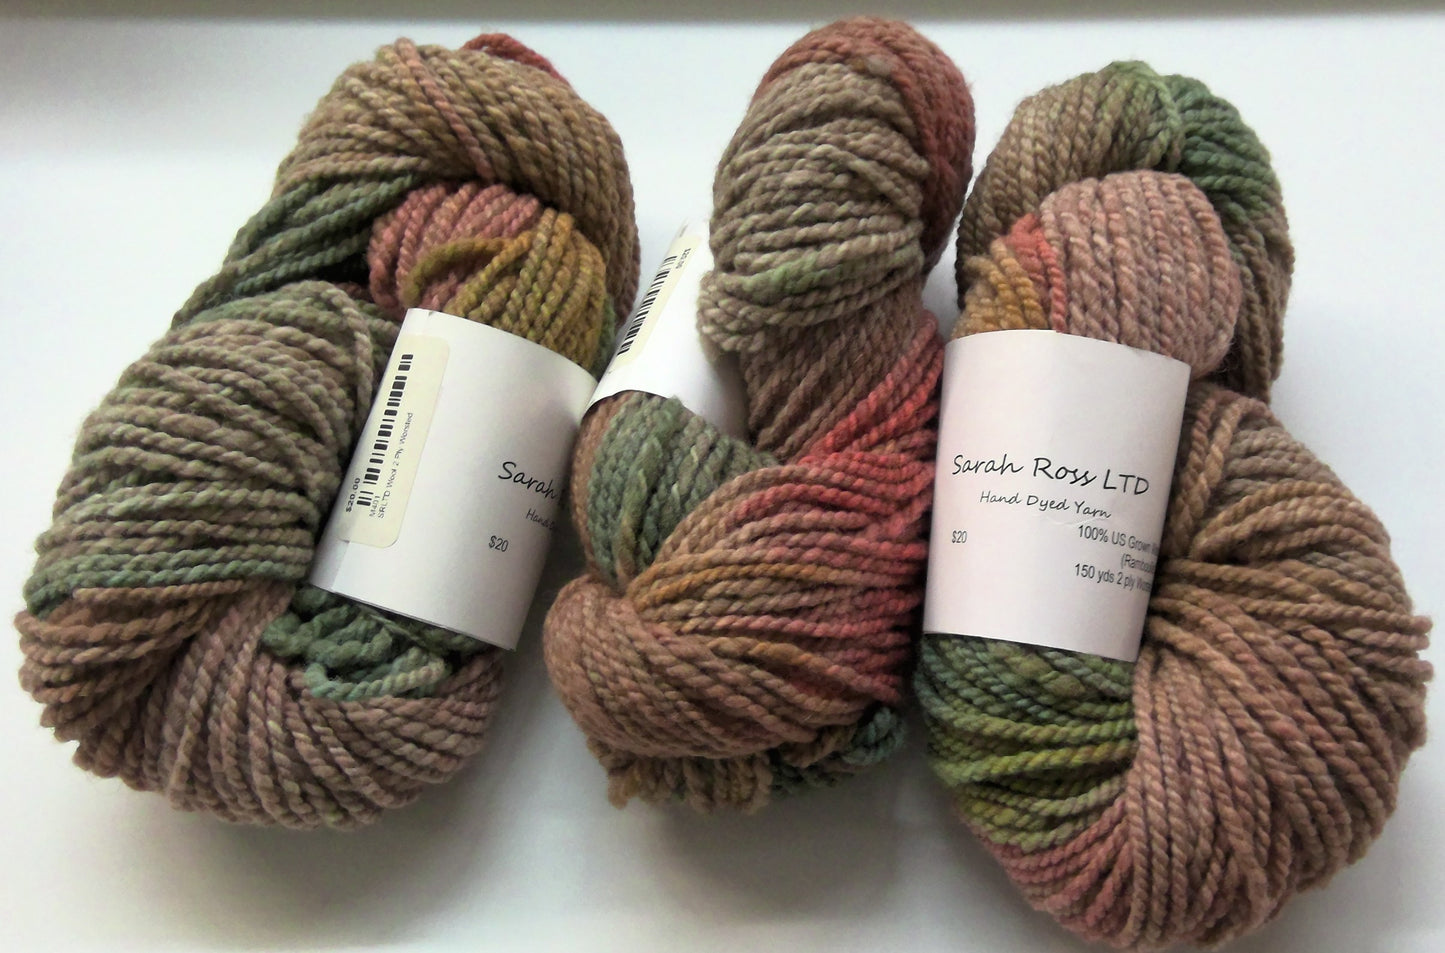 Sarah Ross LTD Hand Dyed Yarn - 2 ply Worsted